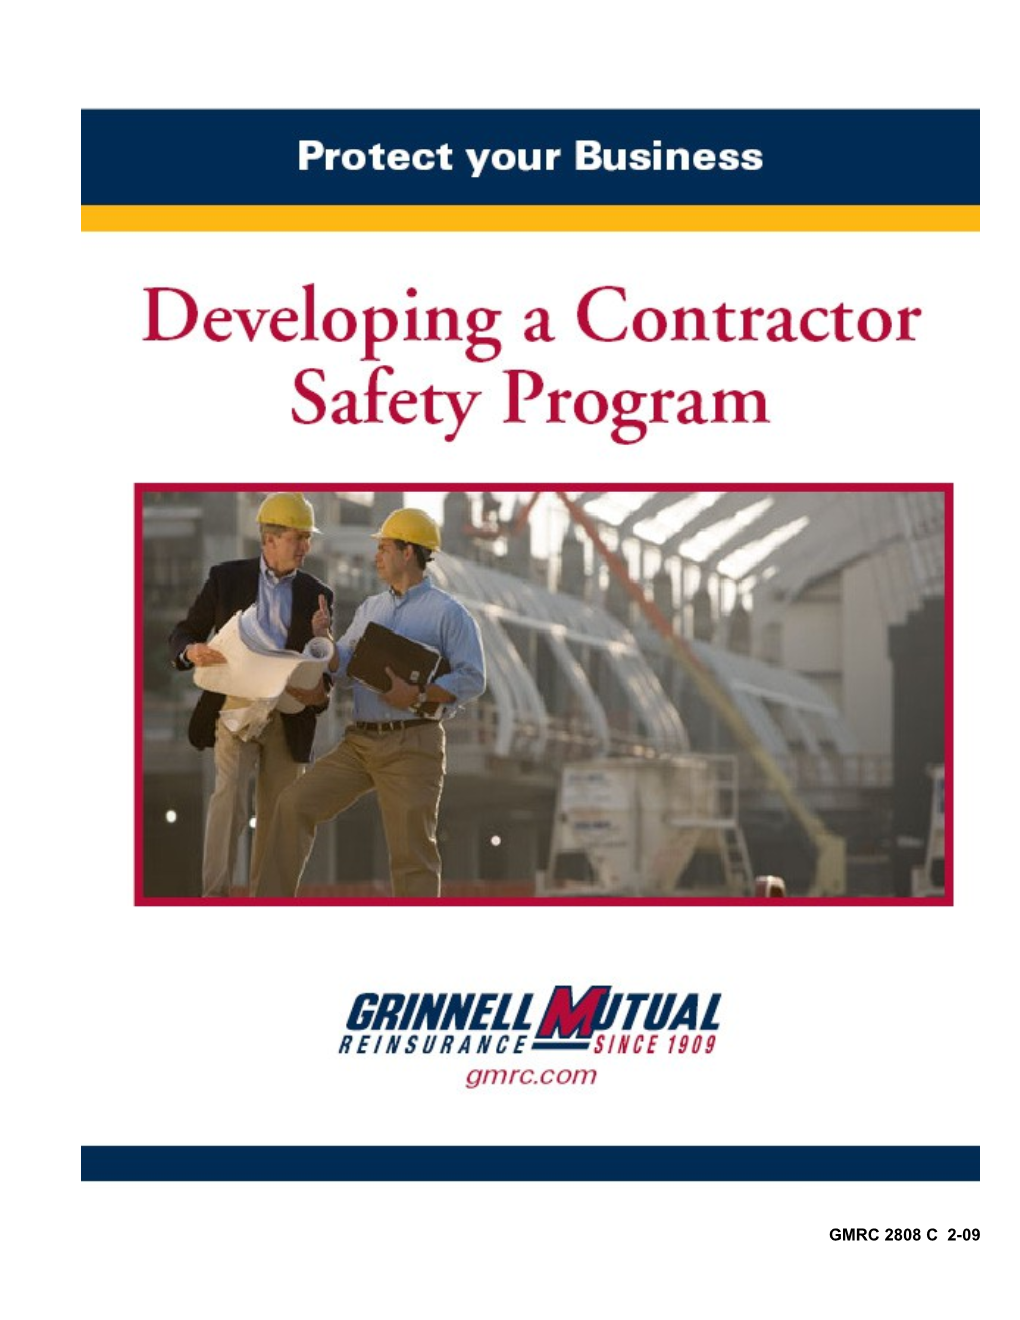 GMRC 2808 C 7/05 Developing A Contractor's Safety Program